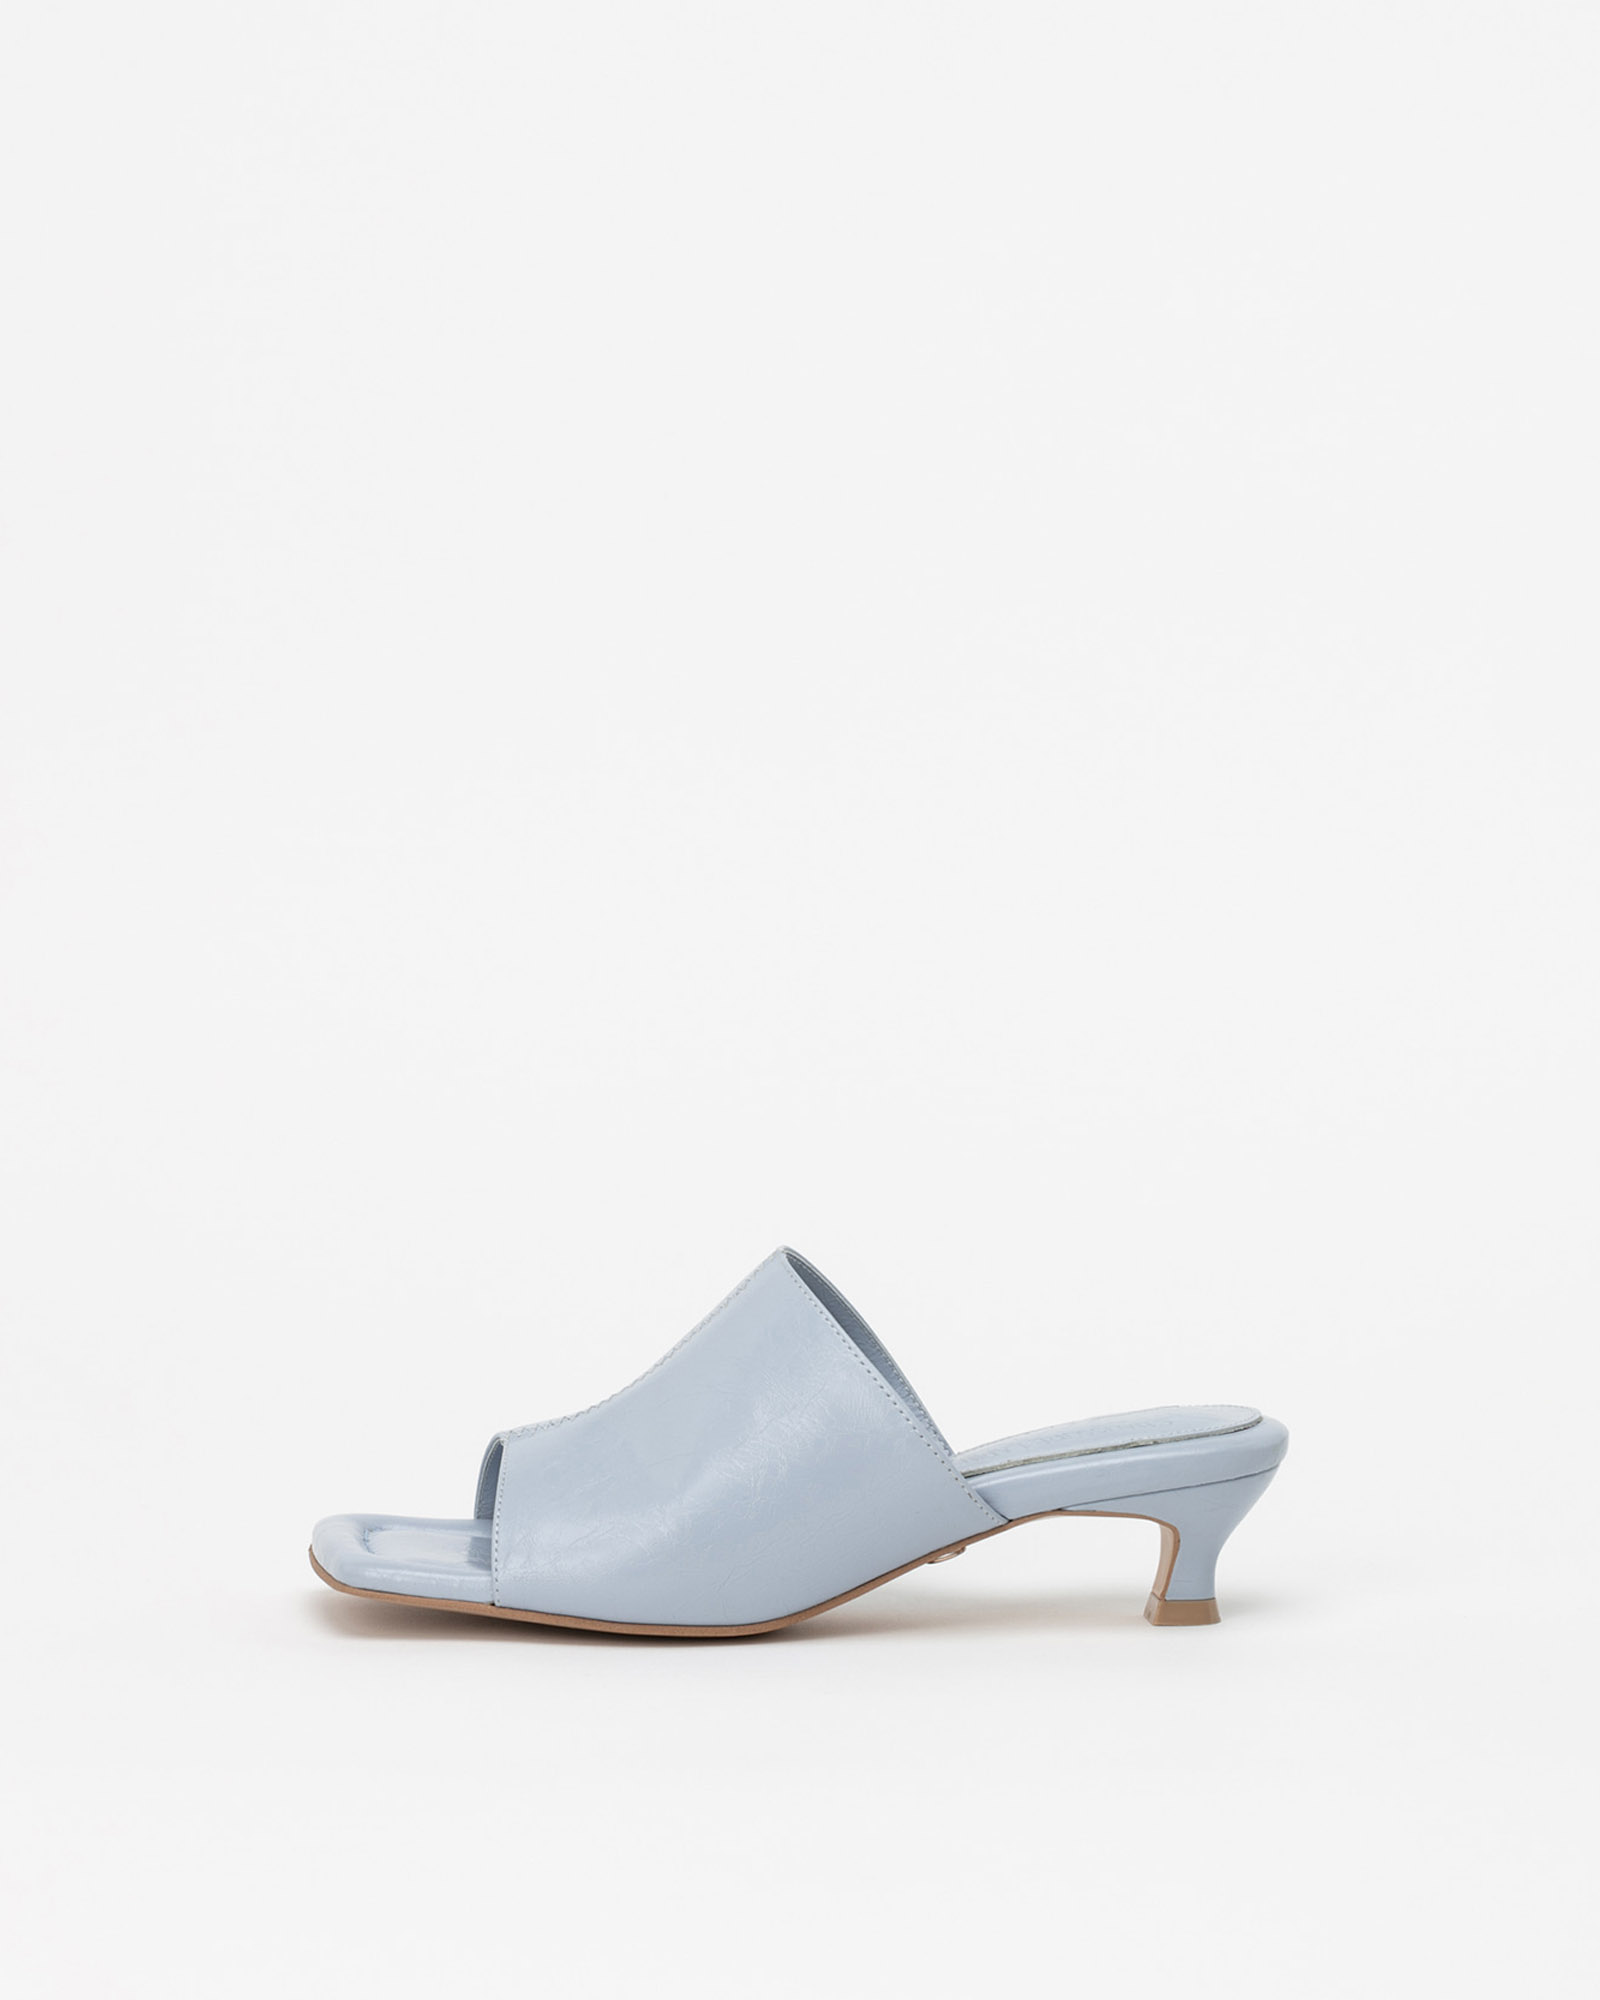 Danto Neo Soft Mules in Wrinkled Baby Blue